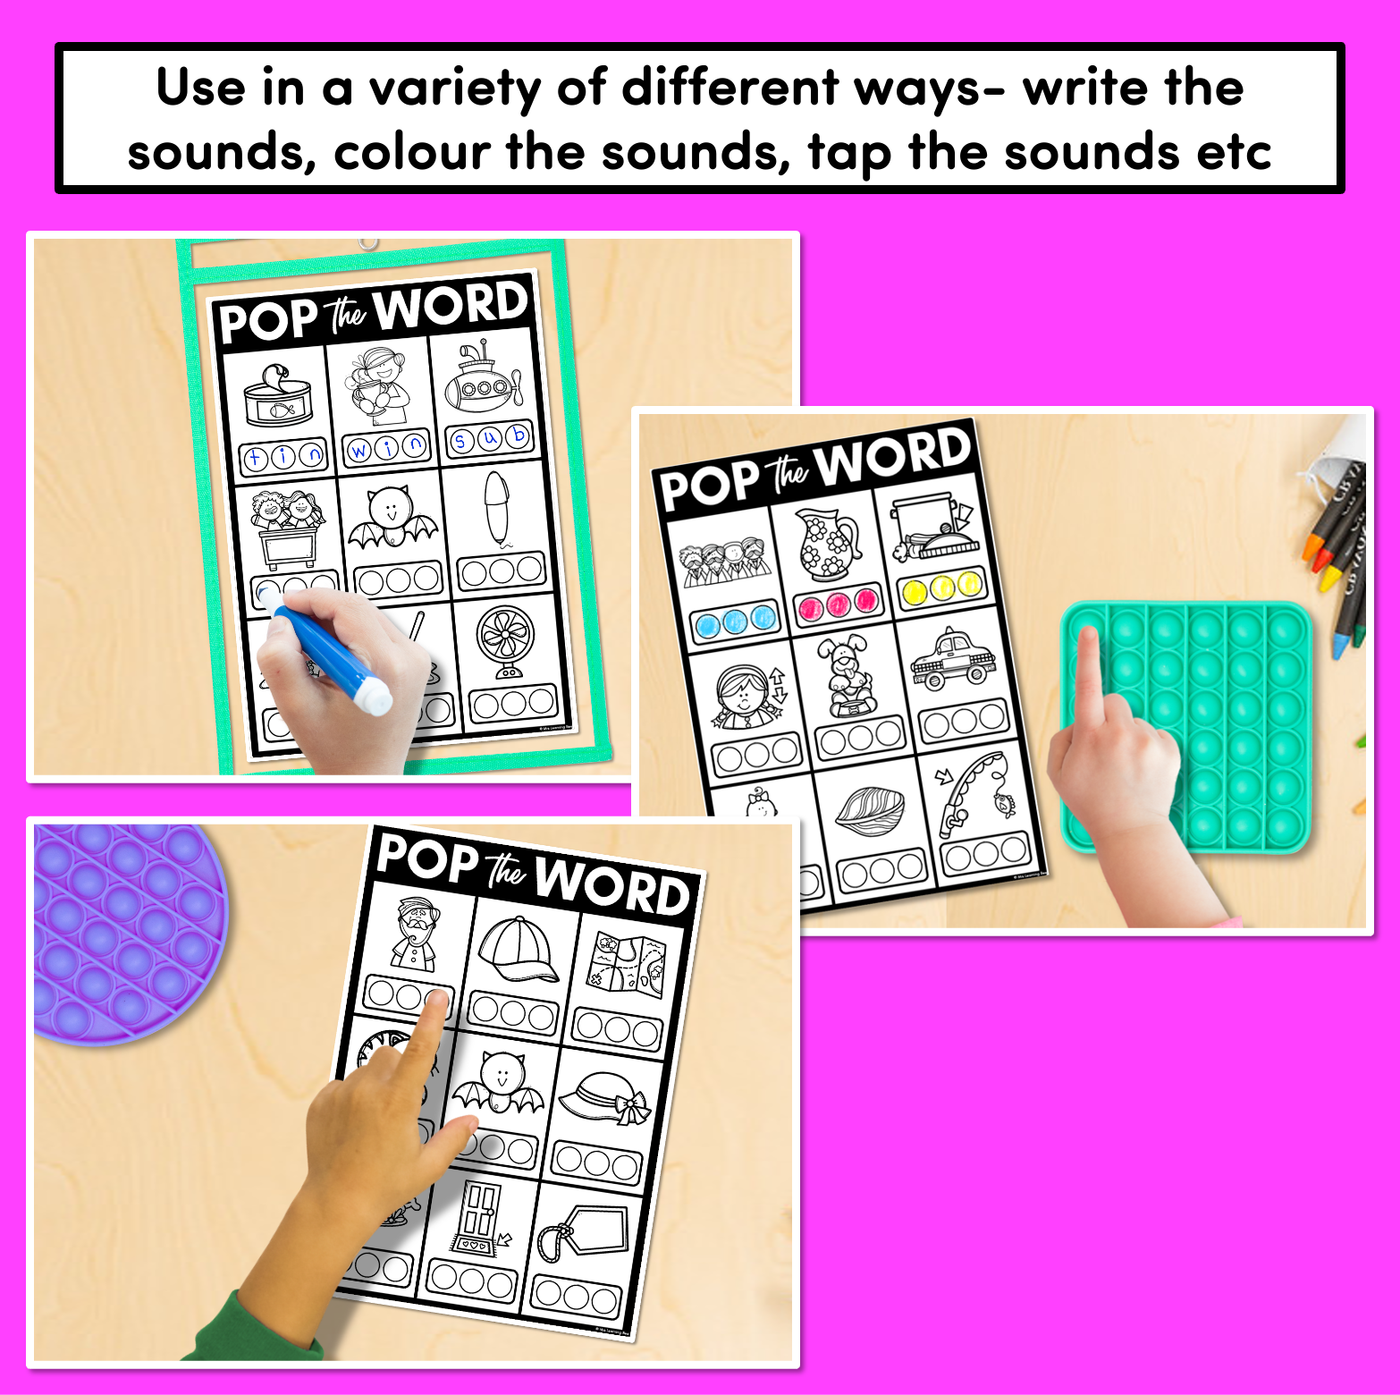 CVCC & CCVC WORD WORKSHEETS for POPPITS - Phonemic Awareness + Word Mapping